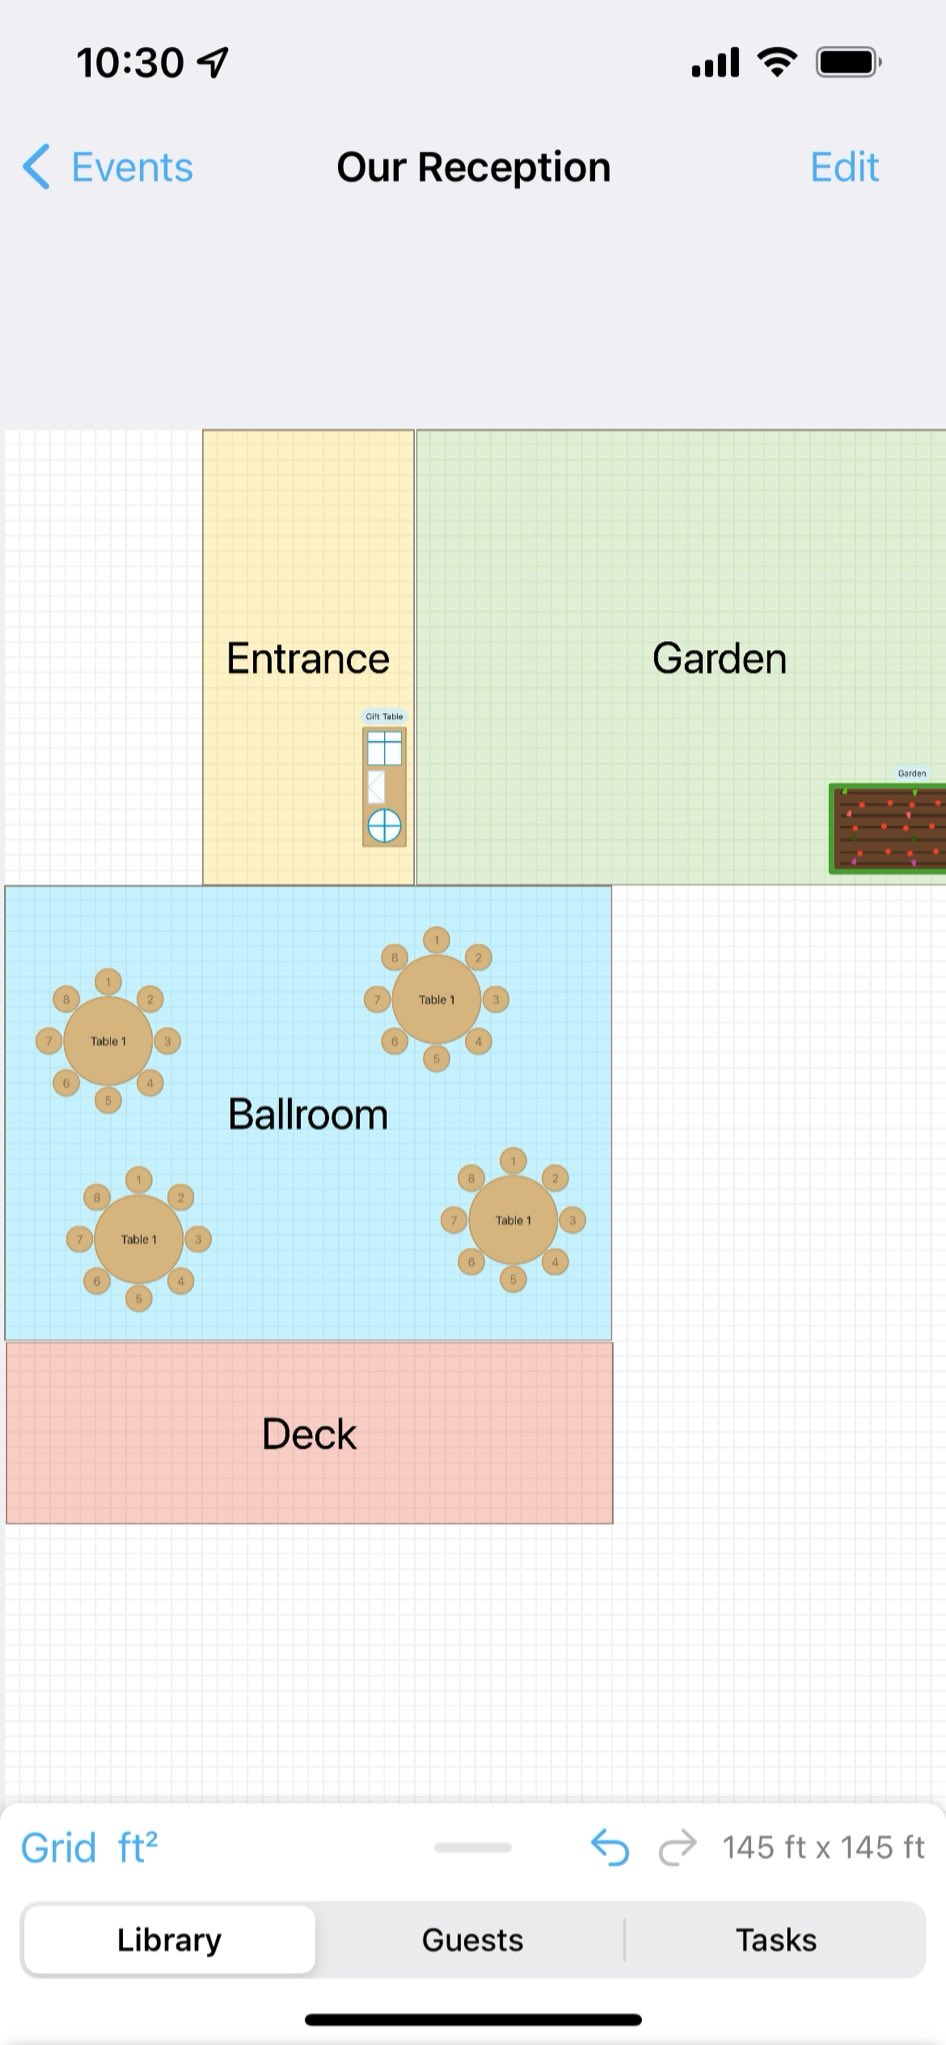 Rooms example showing an entrance, ballroom, and balcony